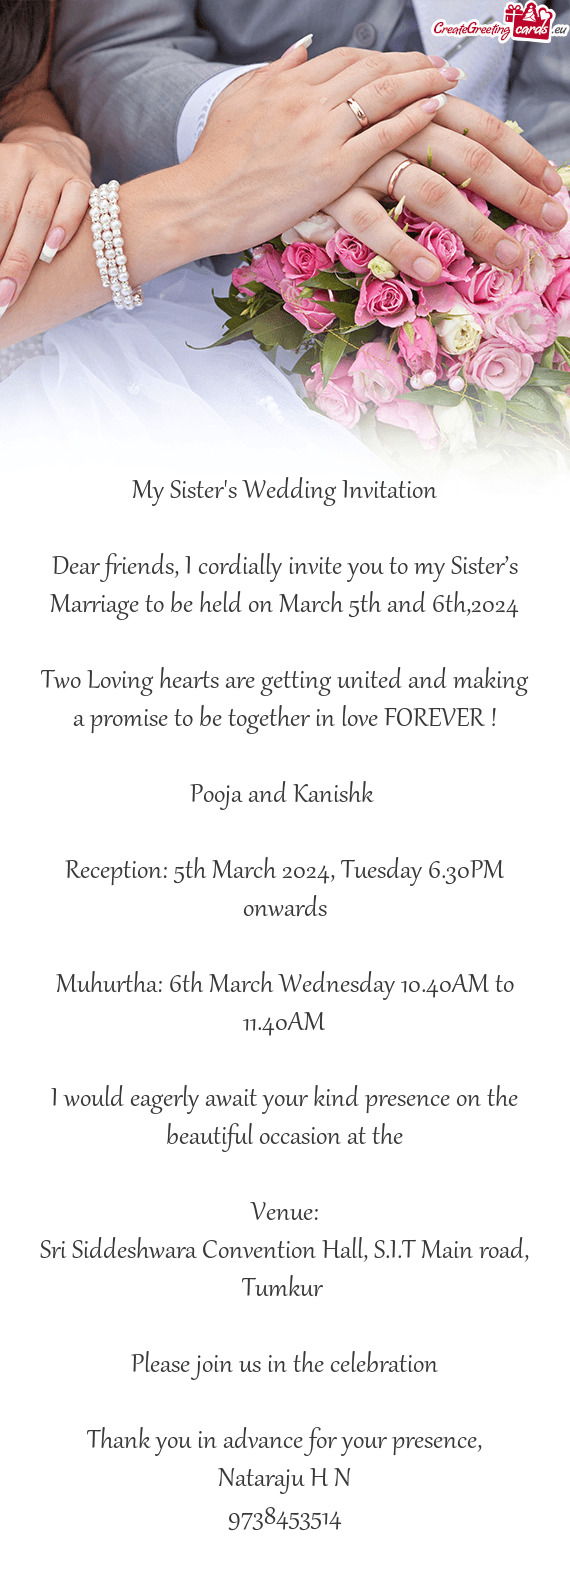 Dear friends, I cordially invite you to my Sister’s Marriage to be held on March 5th and 6th,2024